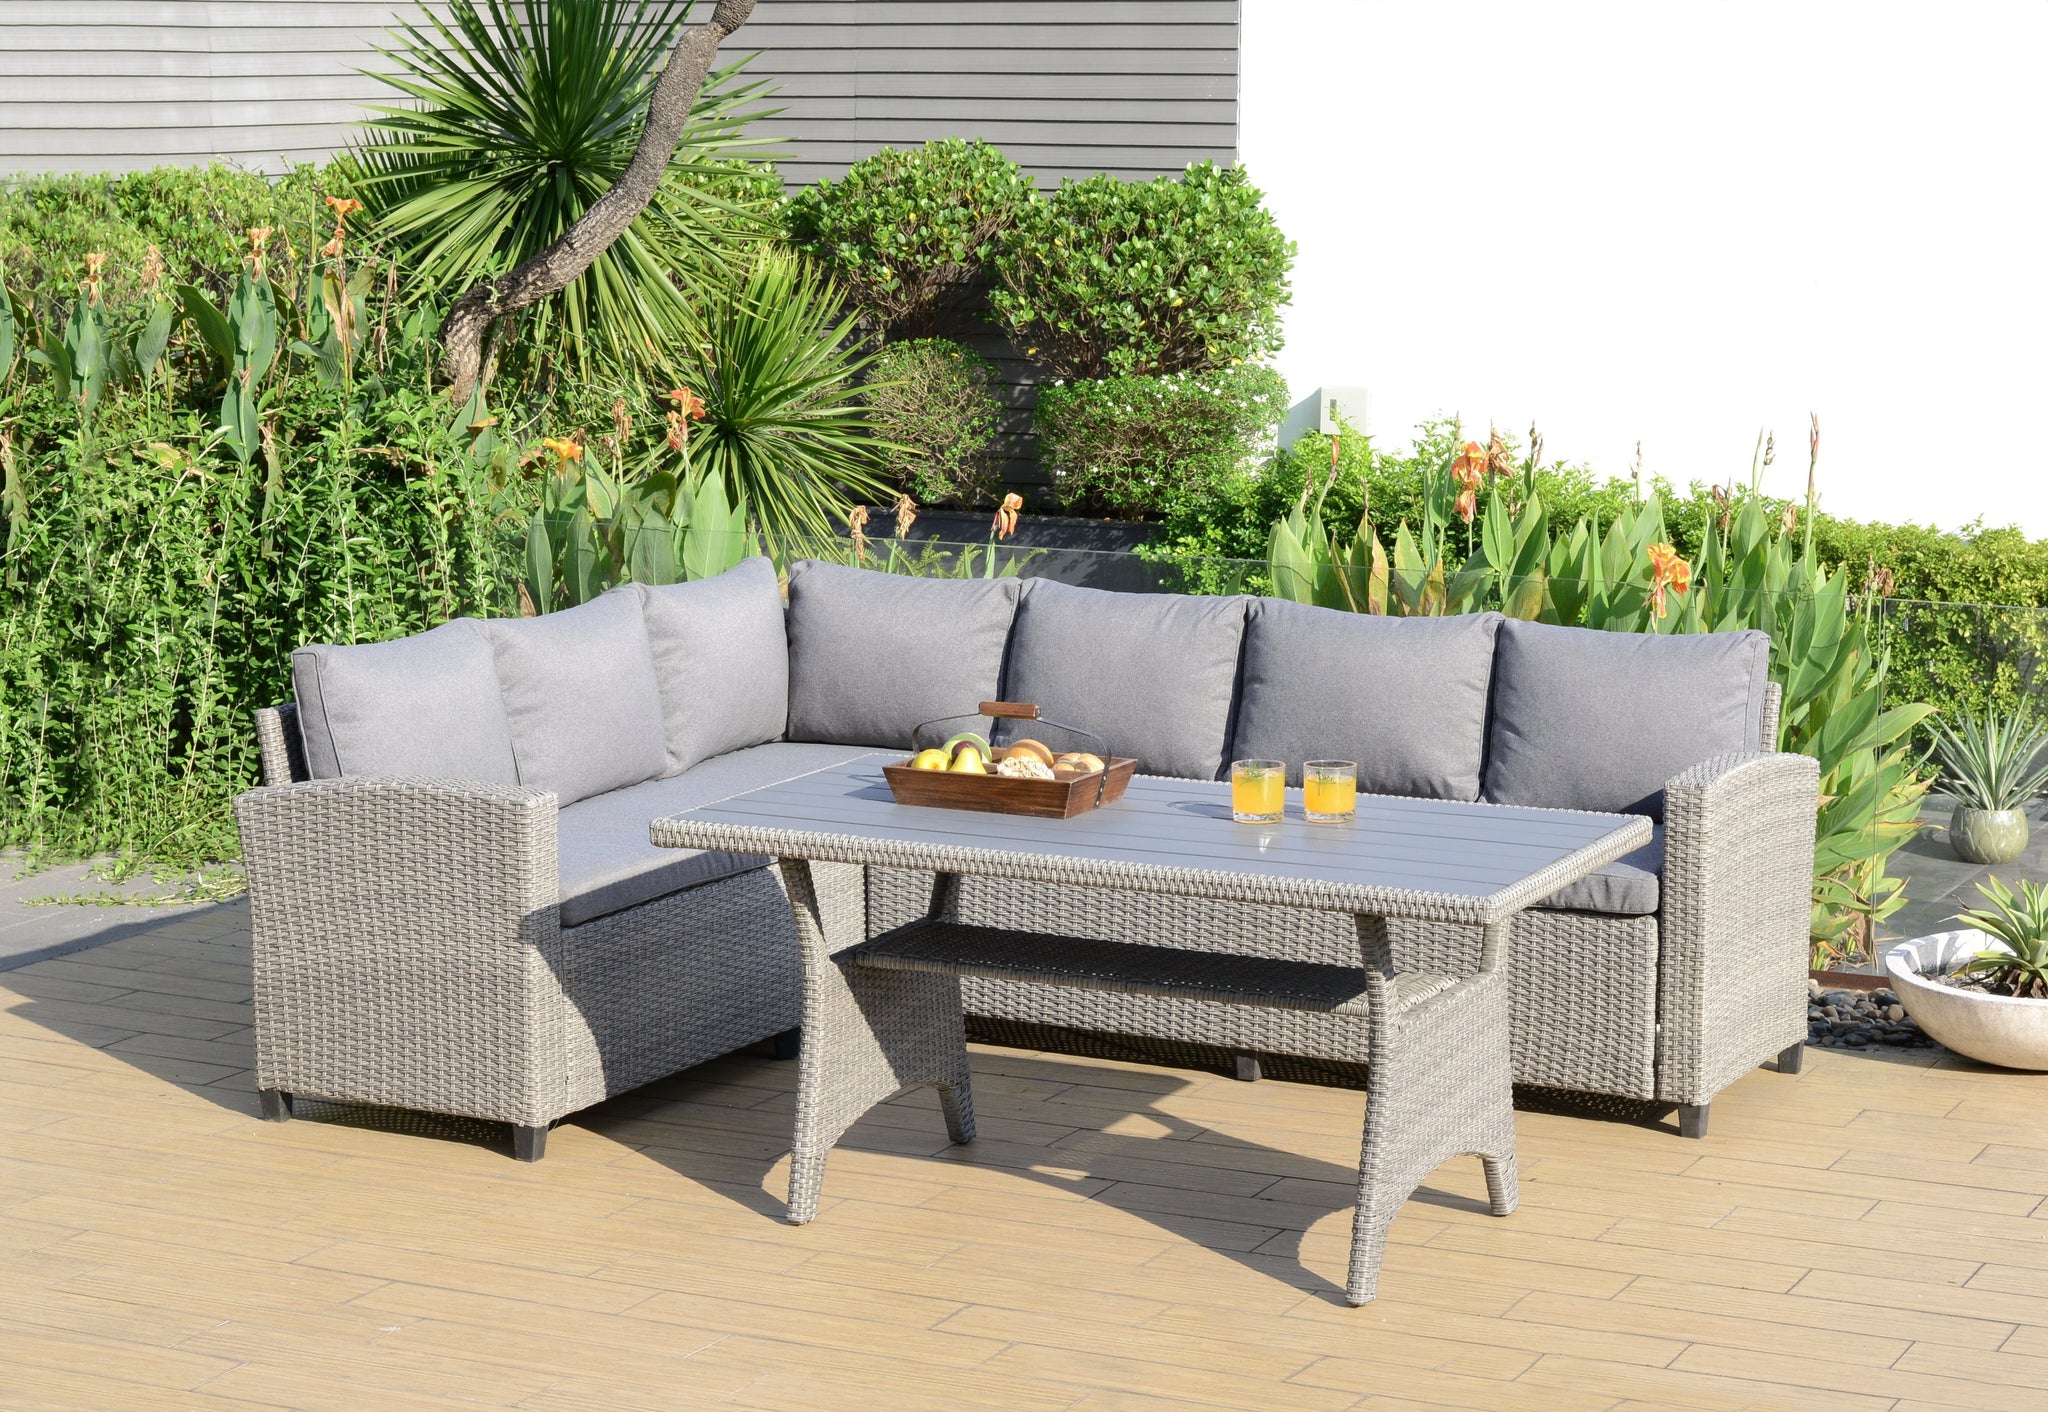 Vinh 3 Piece Wicker Sectional Seating Set - Gray with Cushions